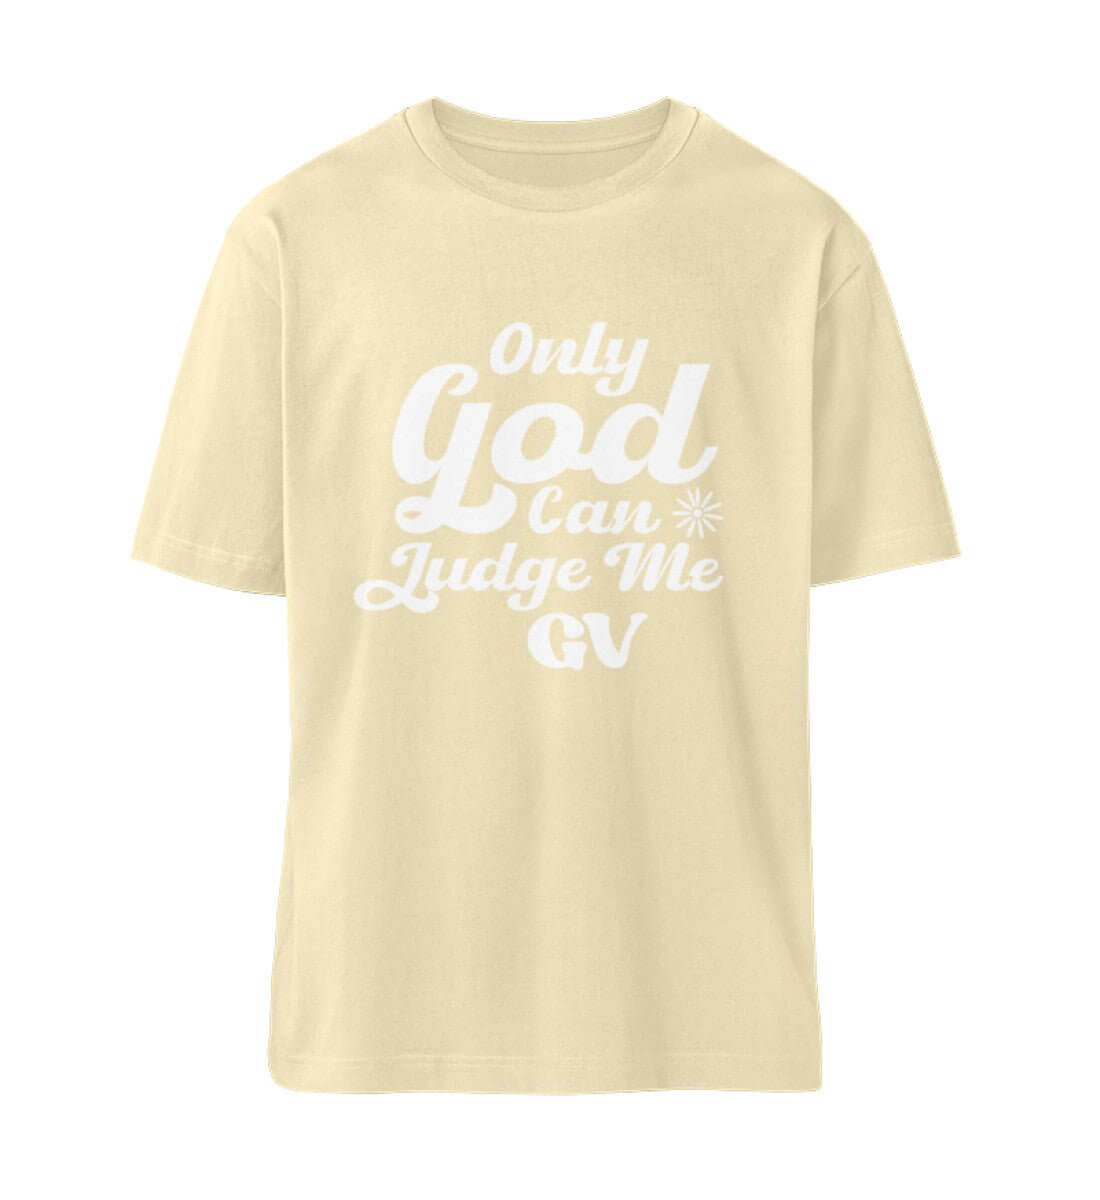 'ONLY GOD CAN JUGDE ME' - Fuser Relaxed Shirt ST/ST - GODVIBES